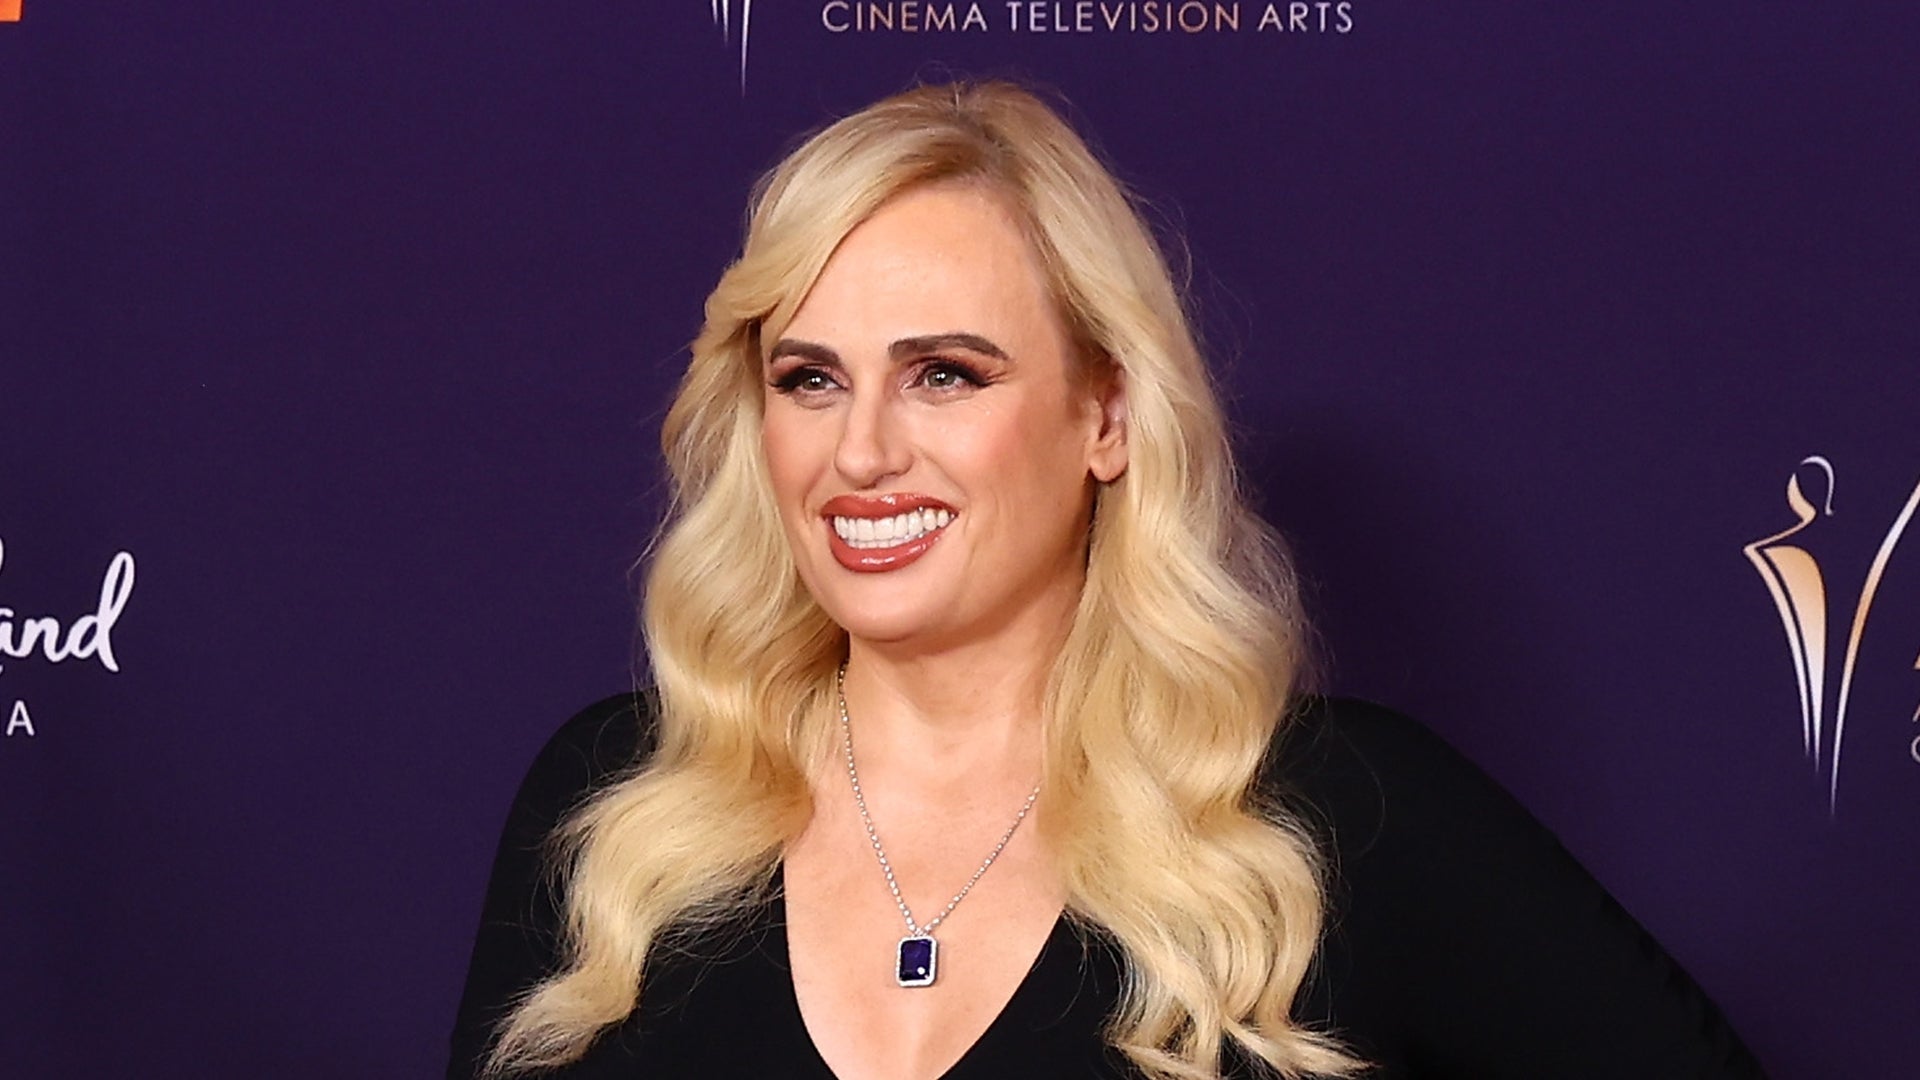 Rebel Wilson Reveals That She Lost Her Virginity at 35